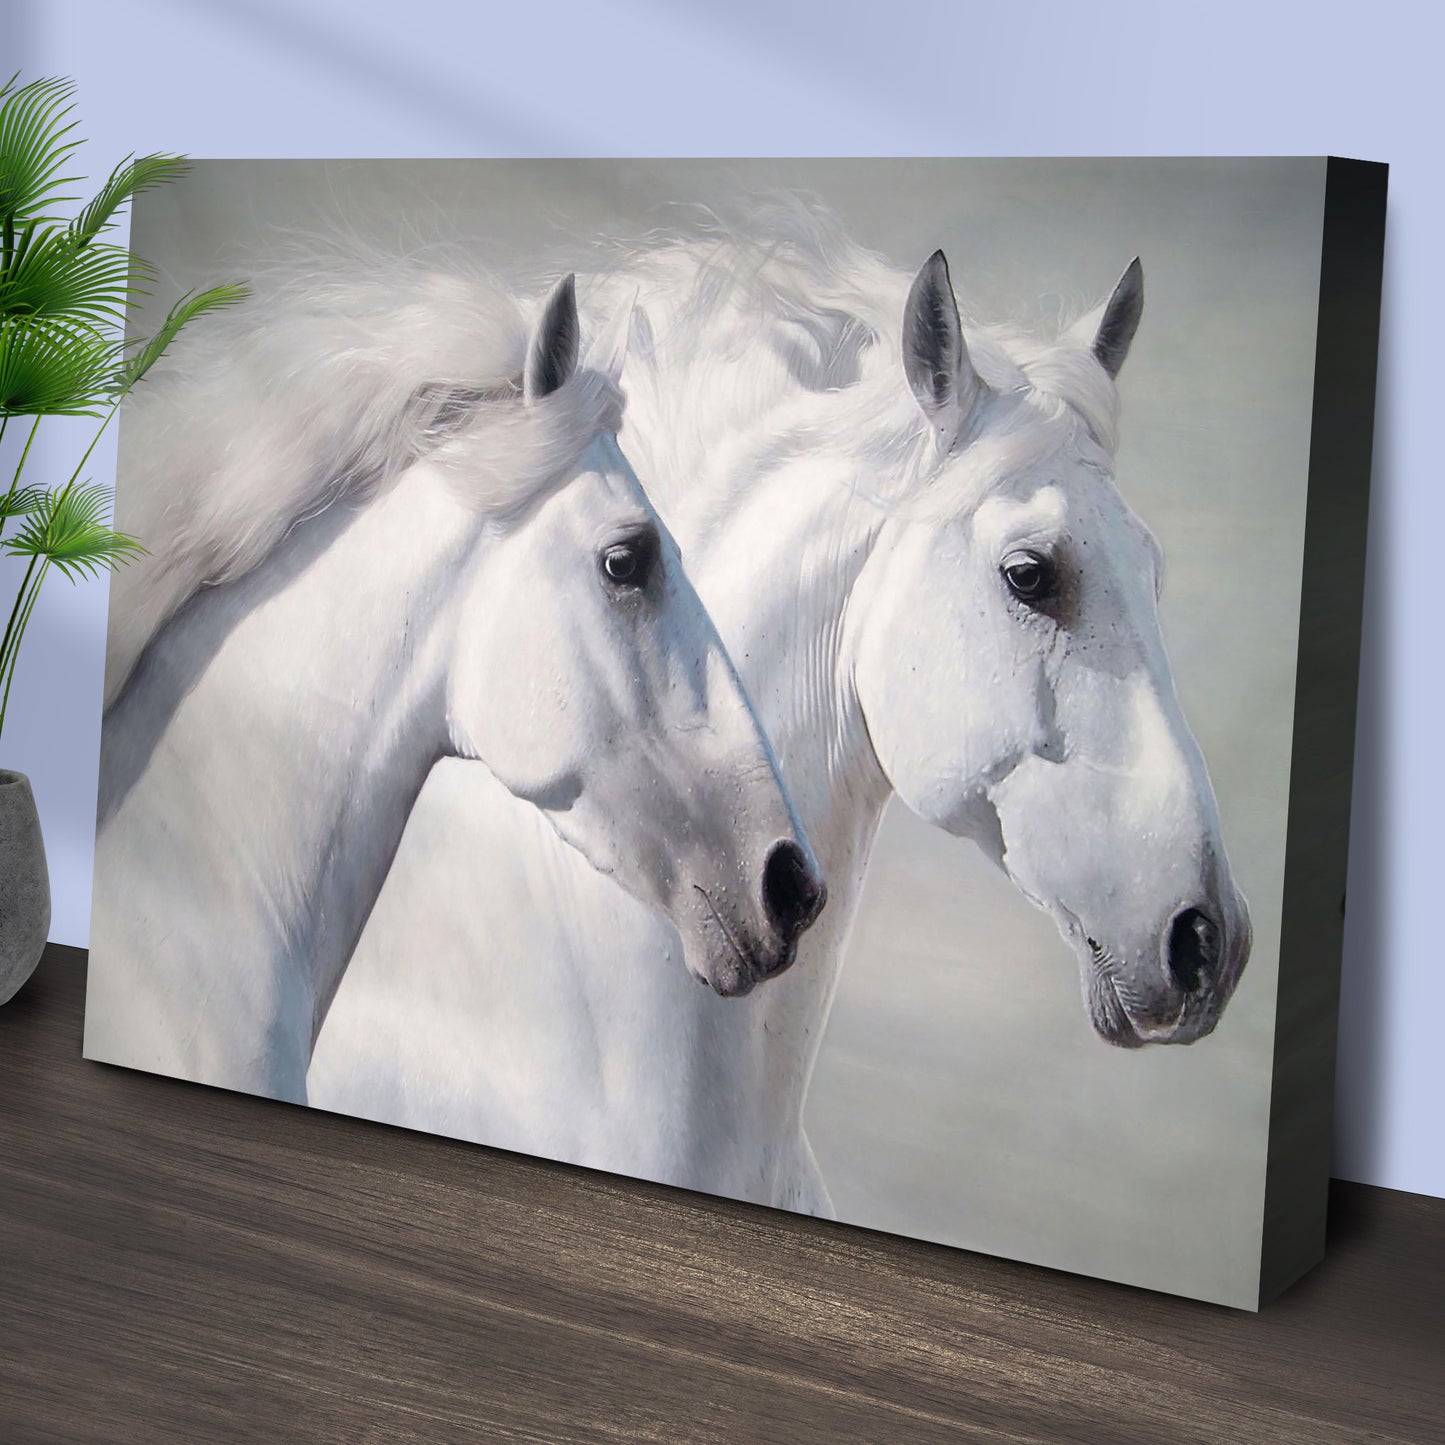 Galloping White Horses Canvas Wall Art Style 1 - Image by Tailored Canvases